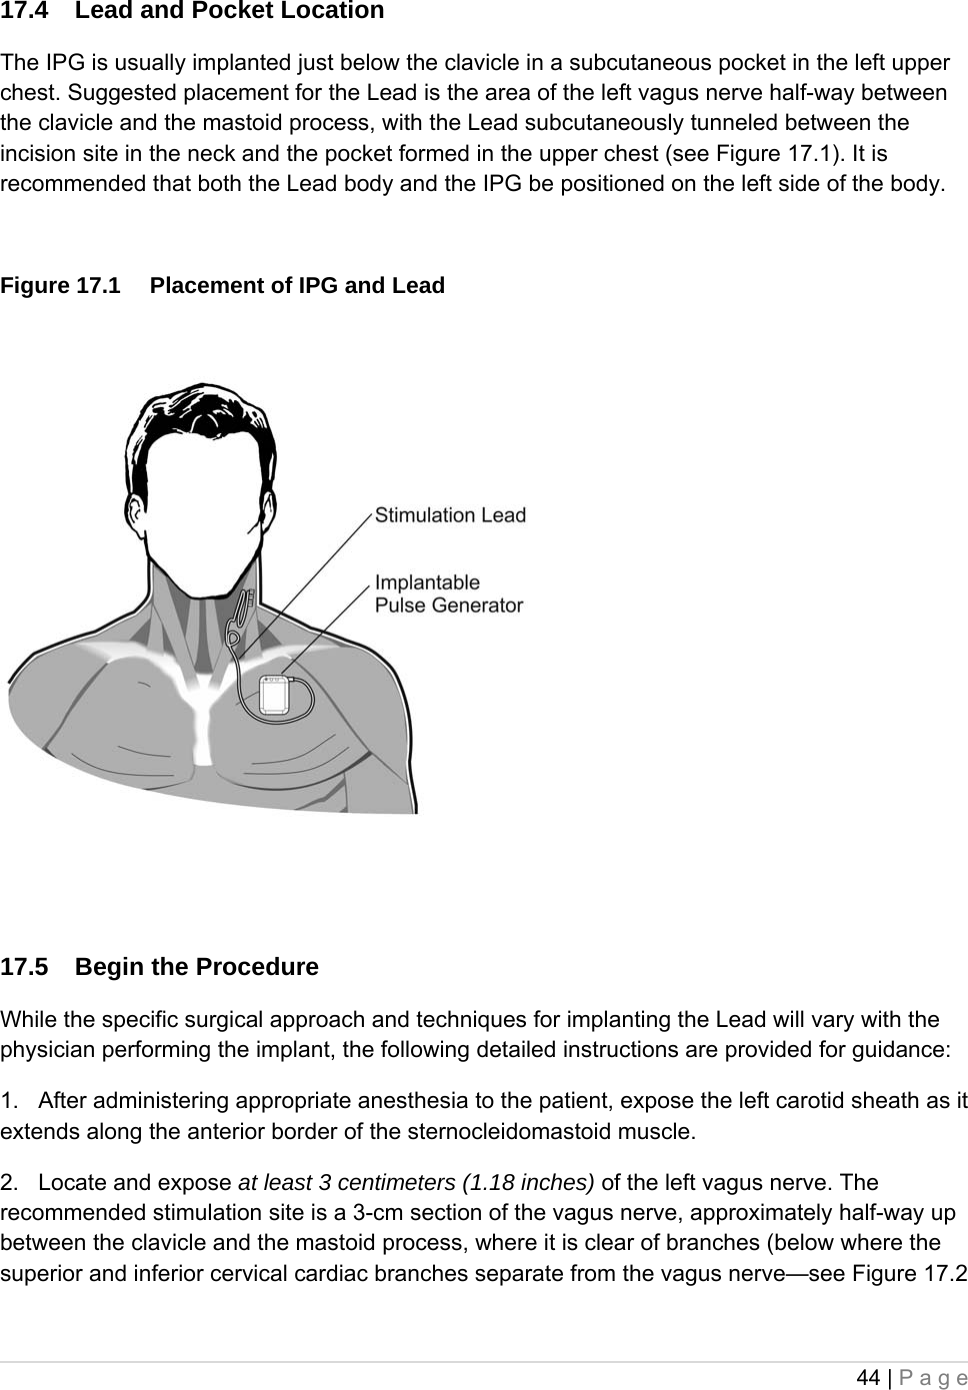 44 | Page  17.4  Lead and Pocket Location  The IPG is usually implanted just below the clavicle in a subcutaneous pocket in the left upper chest. Suggested placement for the Lead is the area of the left vagus nerve half-way between the clavicle and the mastoid process, with the Lead subcutaneously tunneled between the incision site in the neck and the pocket formed in the upper chest (see Figure 17.1). It is recommended that both the Lead body and the IPG be positioned on the left side of the body.   Figure 17.1  Placement of IPG and Lead 17.5  Begin the Procedure While the specific surgical approach and techniques for implanting the Lead will vary with the physician performing the implant, the following detailed instructions are provided for guidance: 1.   After administering appropriate anesthesia to the patient, expose the left carotid sheath as it extends along the anterior border of the sternocleidomastoid muscle.  2.   Locate and expose at least 3 centimeters (1.18 inches) of the left vagus nerve. The recommended stimulation site is a 3-cm section of the vagus nerve, approximately half-way up between the clavicle and the mastoid process, where it is clear of branches (below where the superior and inferior cervical cardiac branches separate from the vagus nerve—see Figure 17.2 